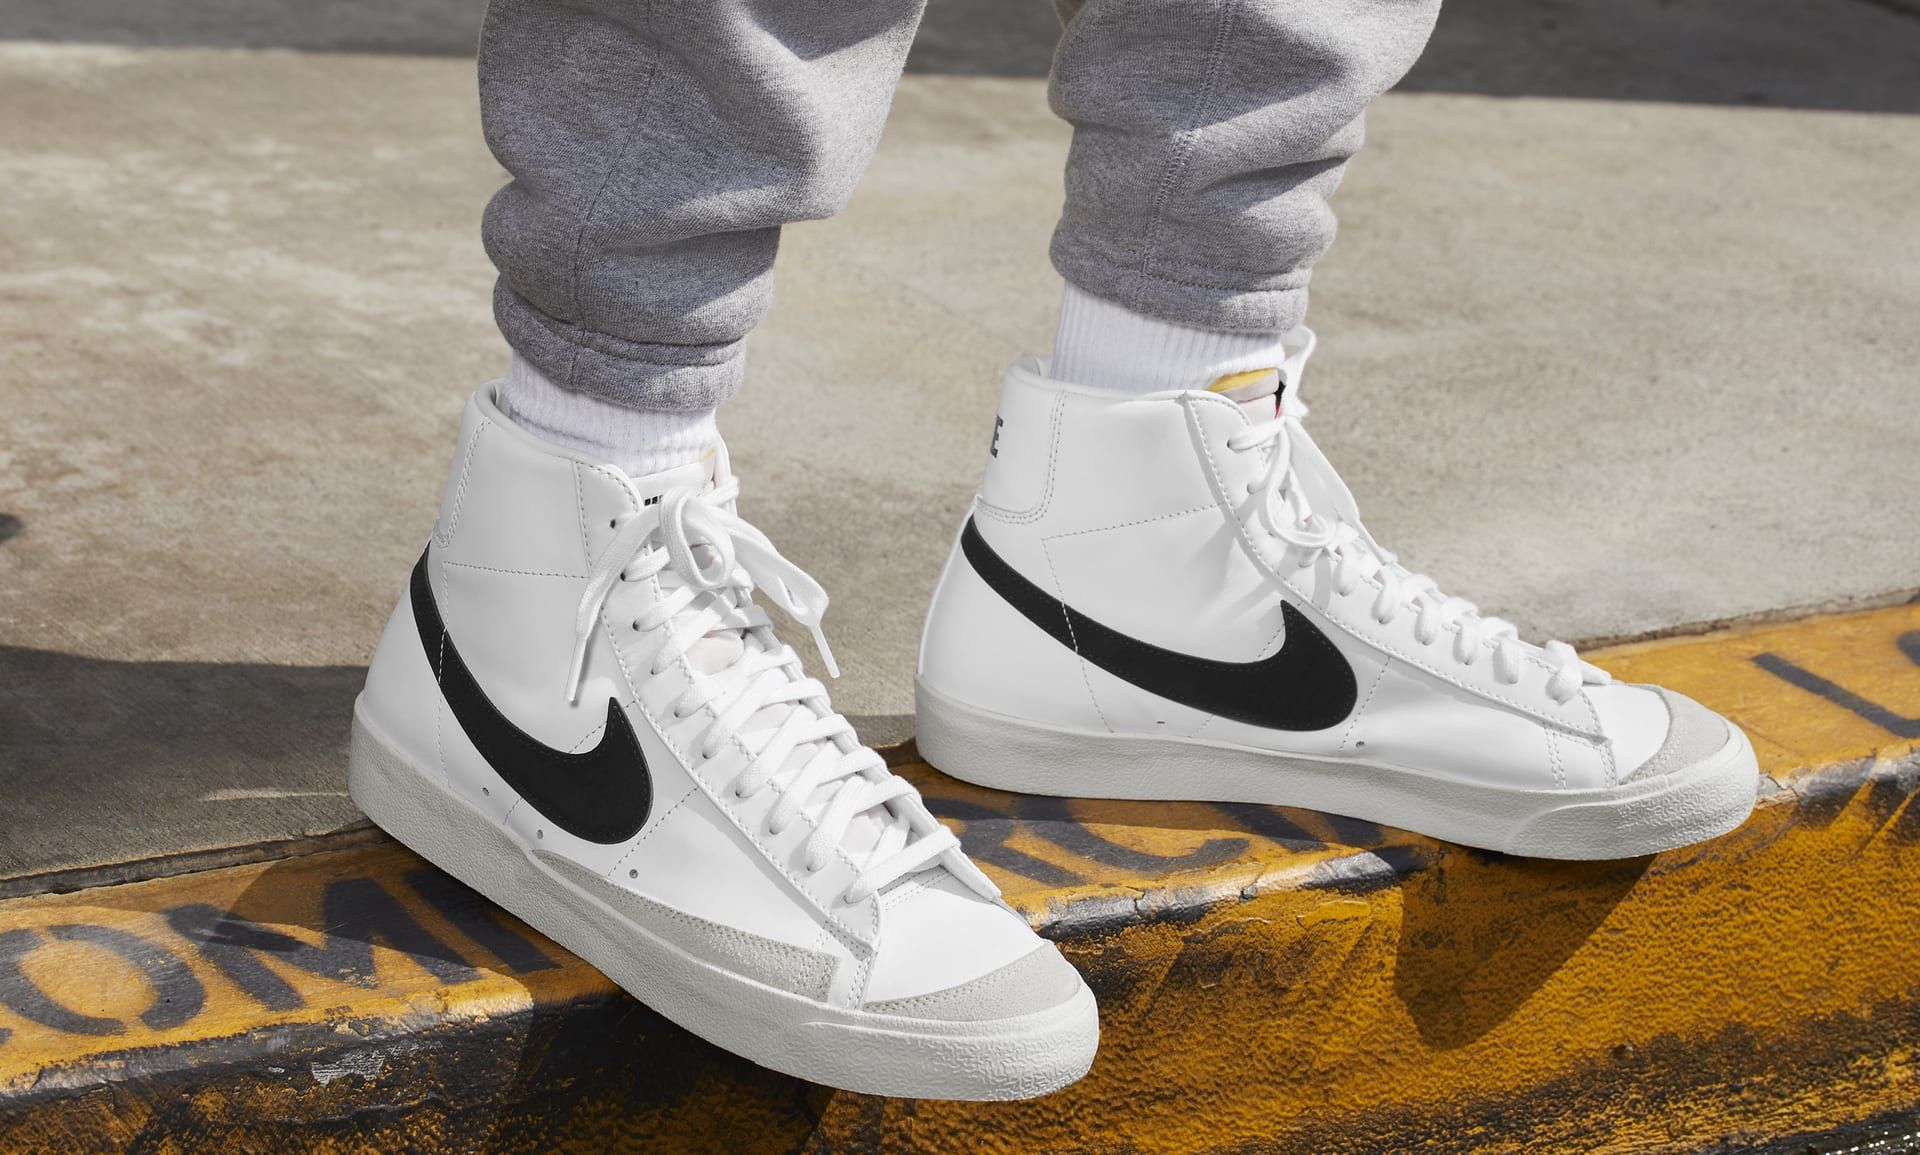 problema Caucho Asado Reviewing Nike's Best-Selling Blazer Mid '77 Vintage